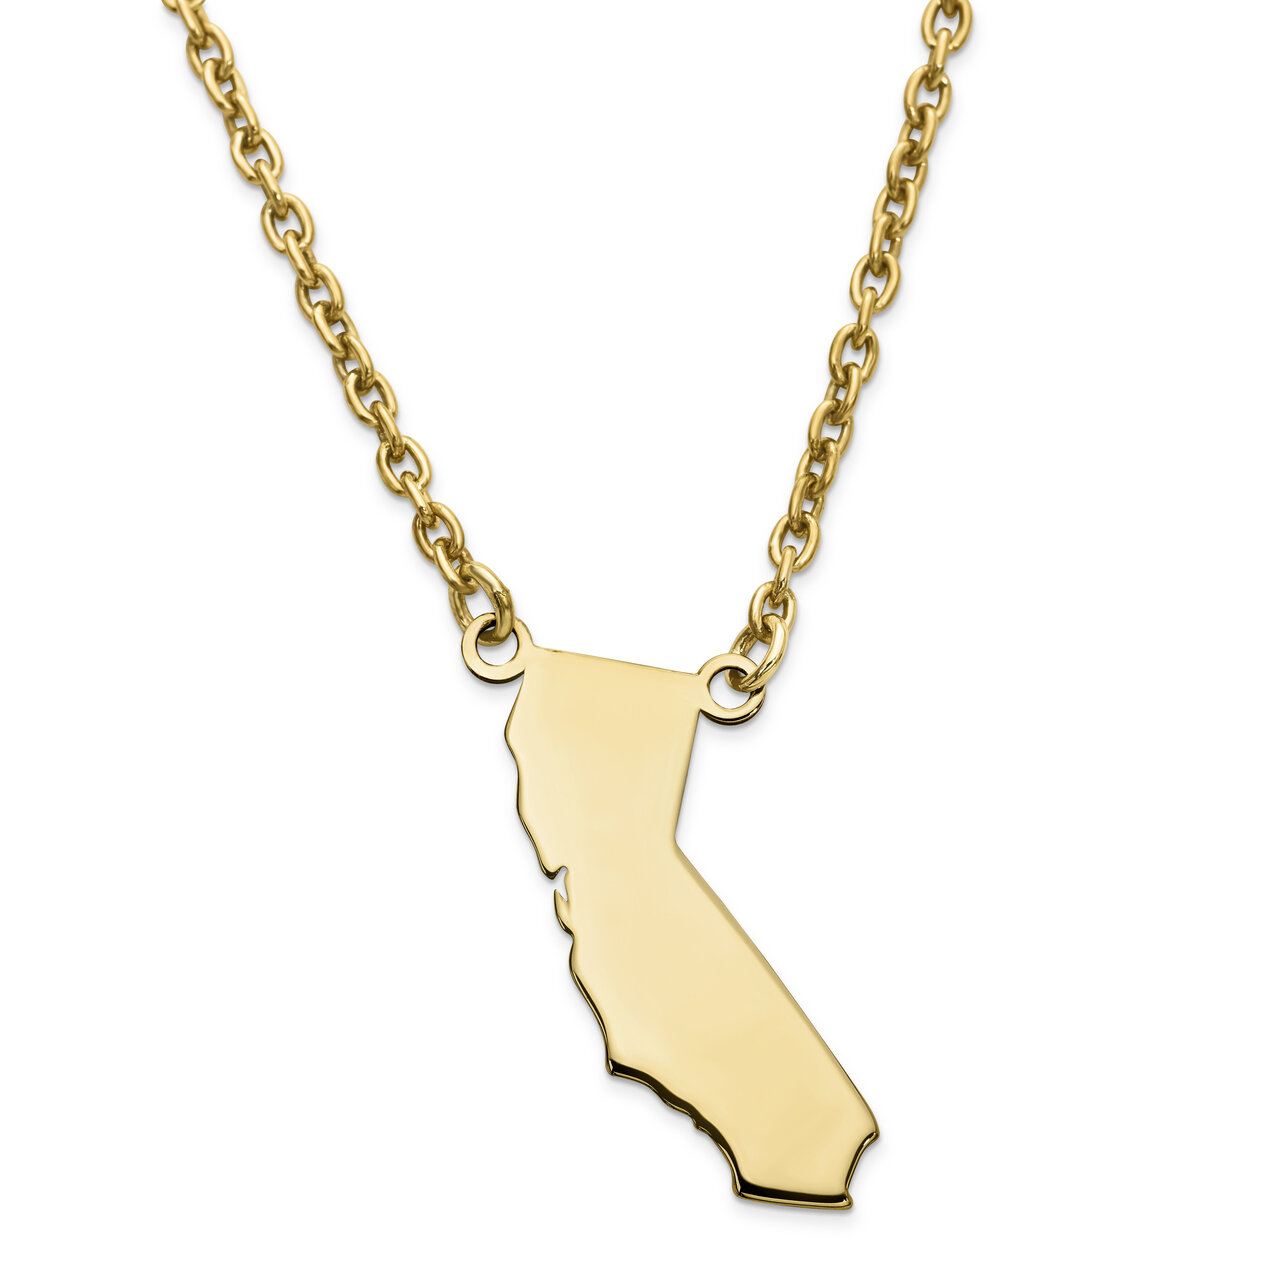 California State Pendant Necklace with Chain 14k Yellow Gold Engravable XNA706Y-CA